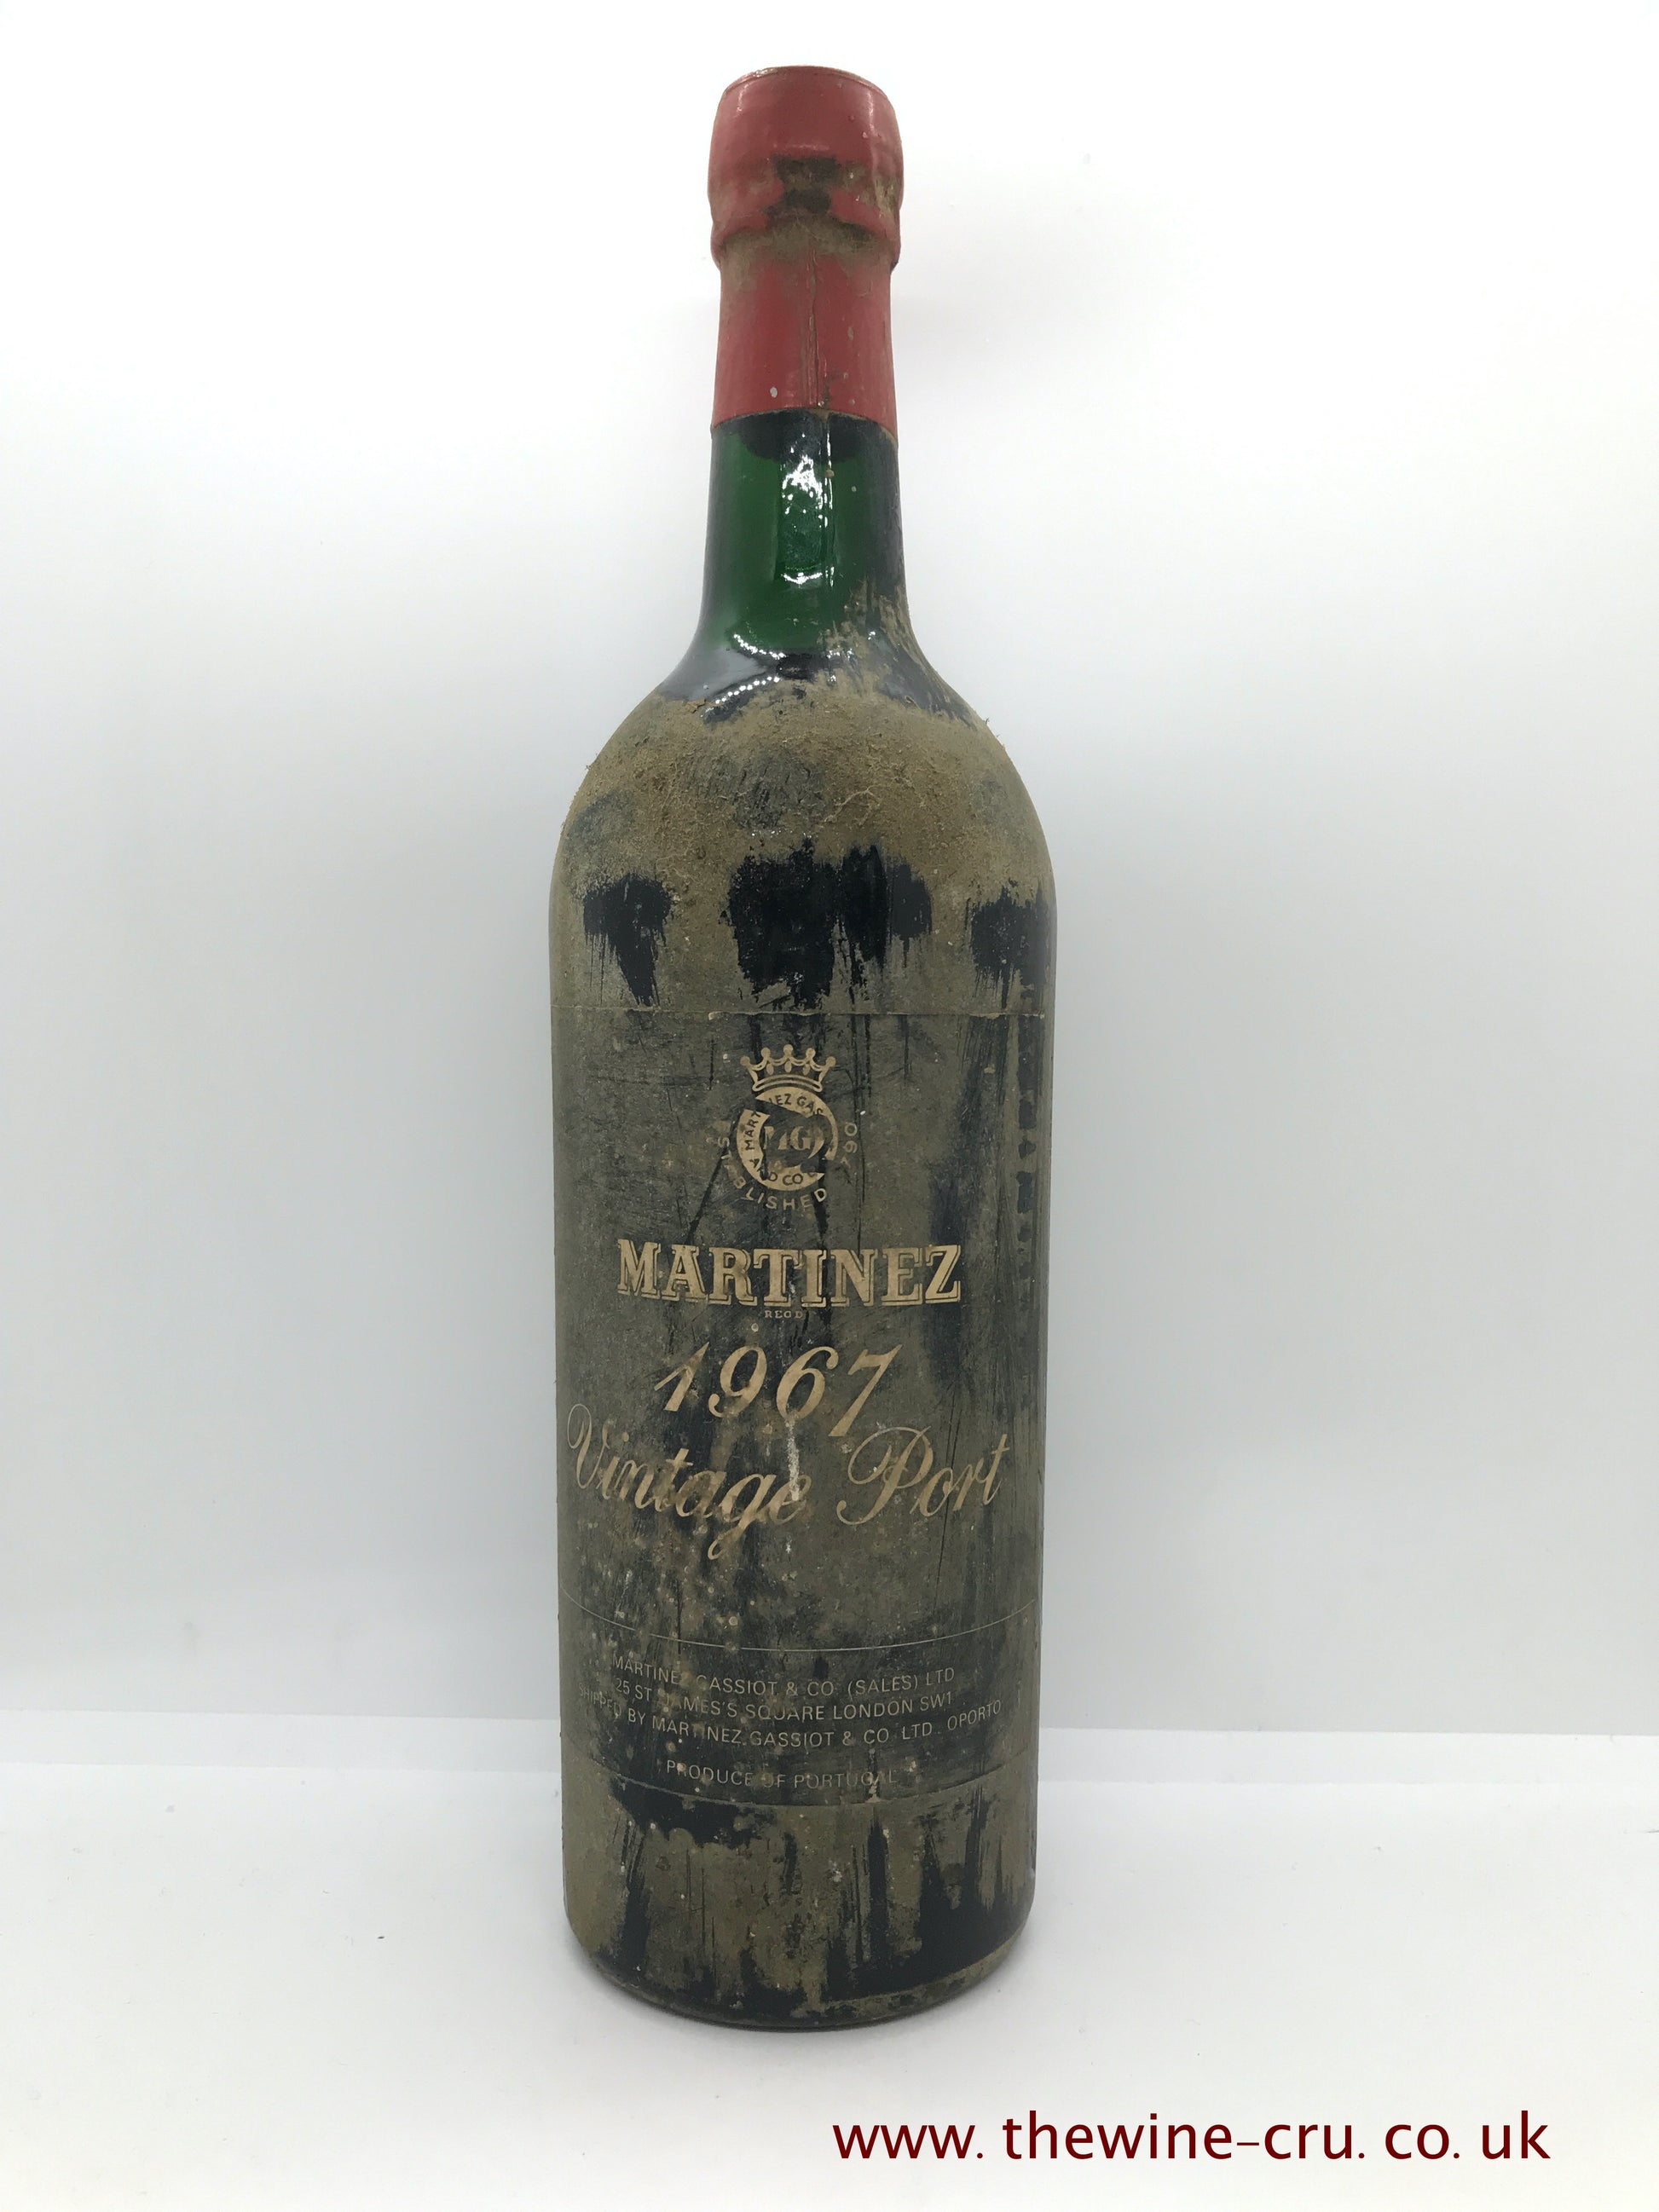 1967 vintage port wine. Martinez Vintage Port 1967. Portugal. Immediate delivery. Free local delivery. Gift wrapping available.